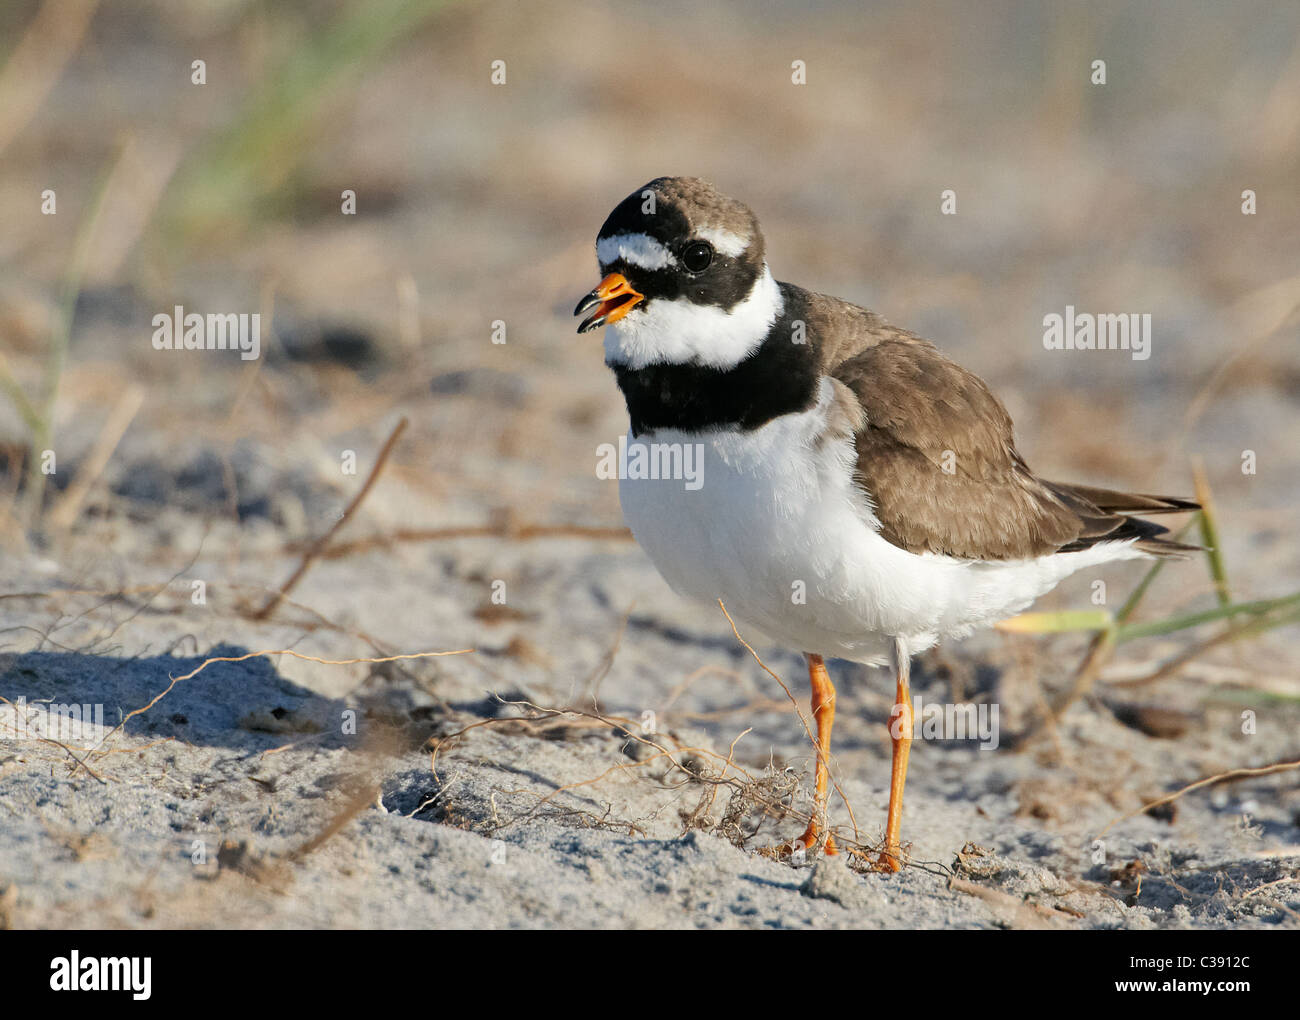 Ringed Plover (Charadrius hiaticula), adult calling while standing on sand. Stock Photo